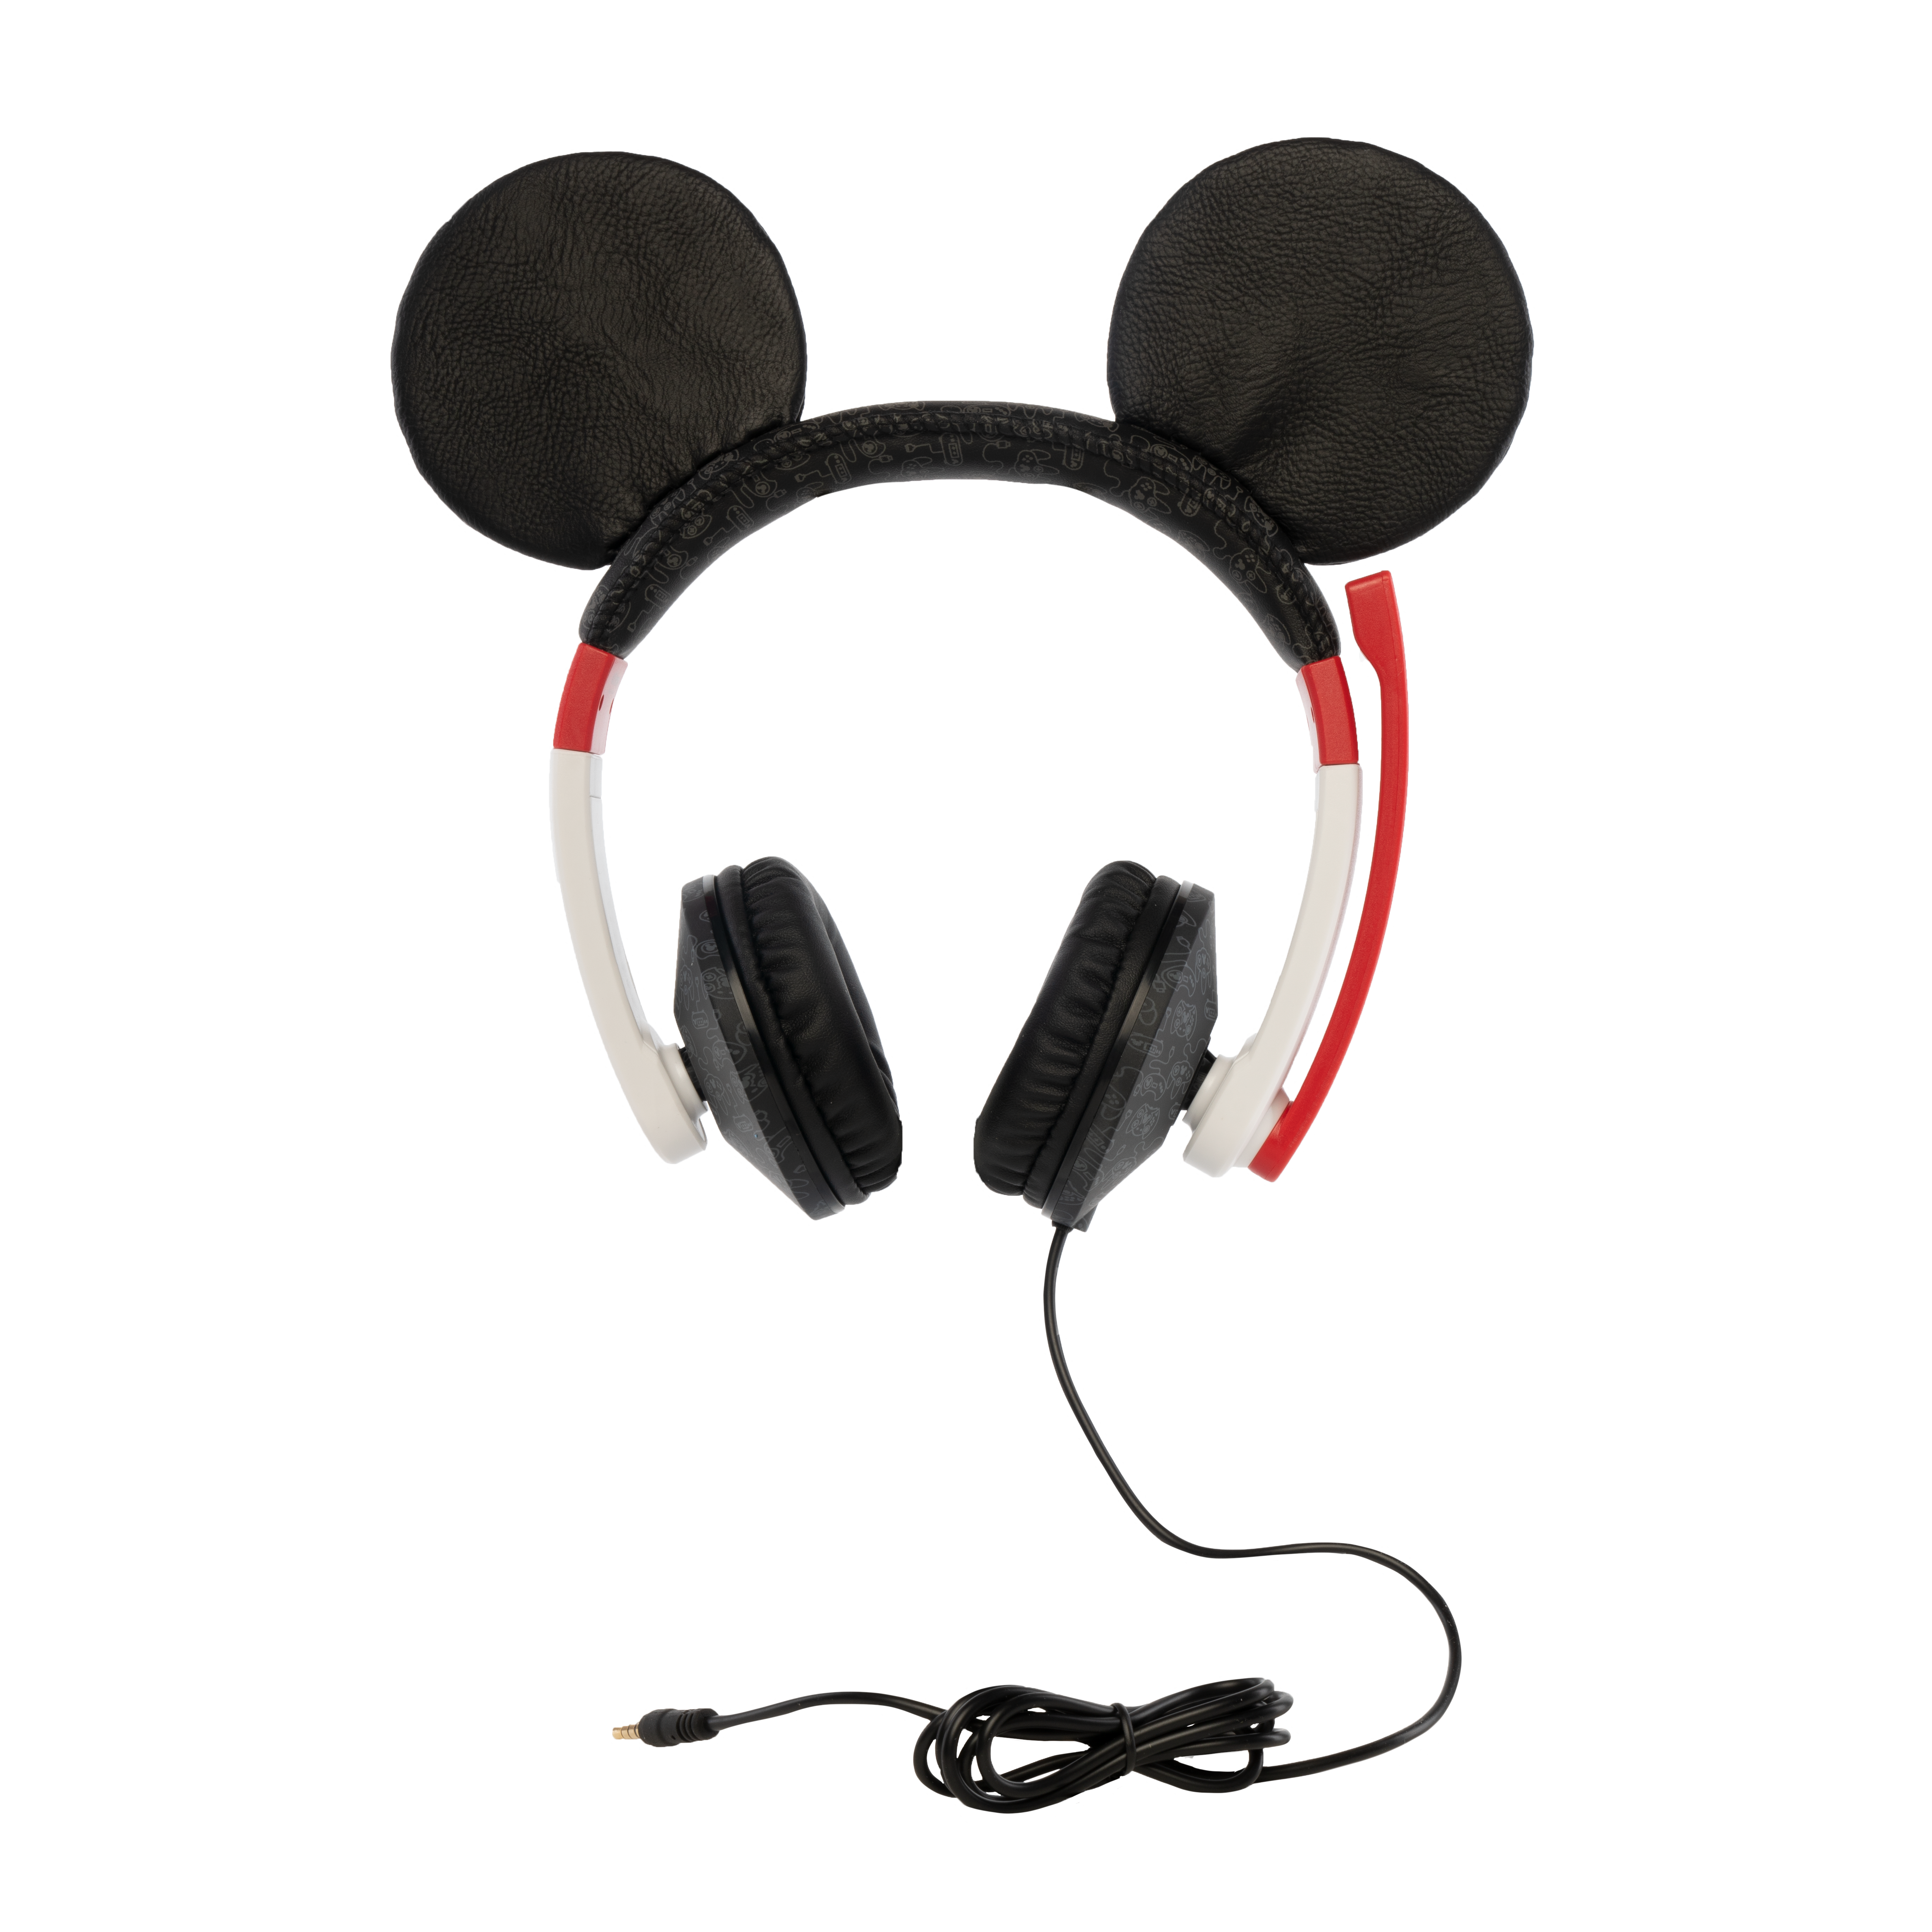 headset mickey mouse